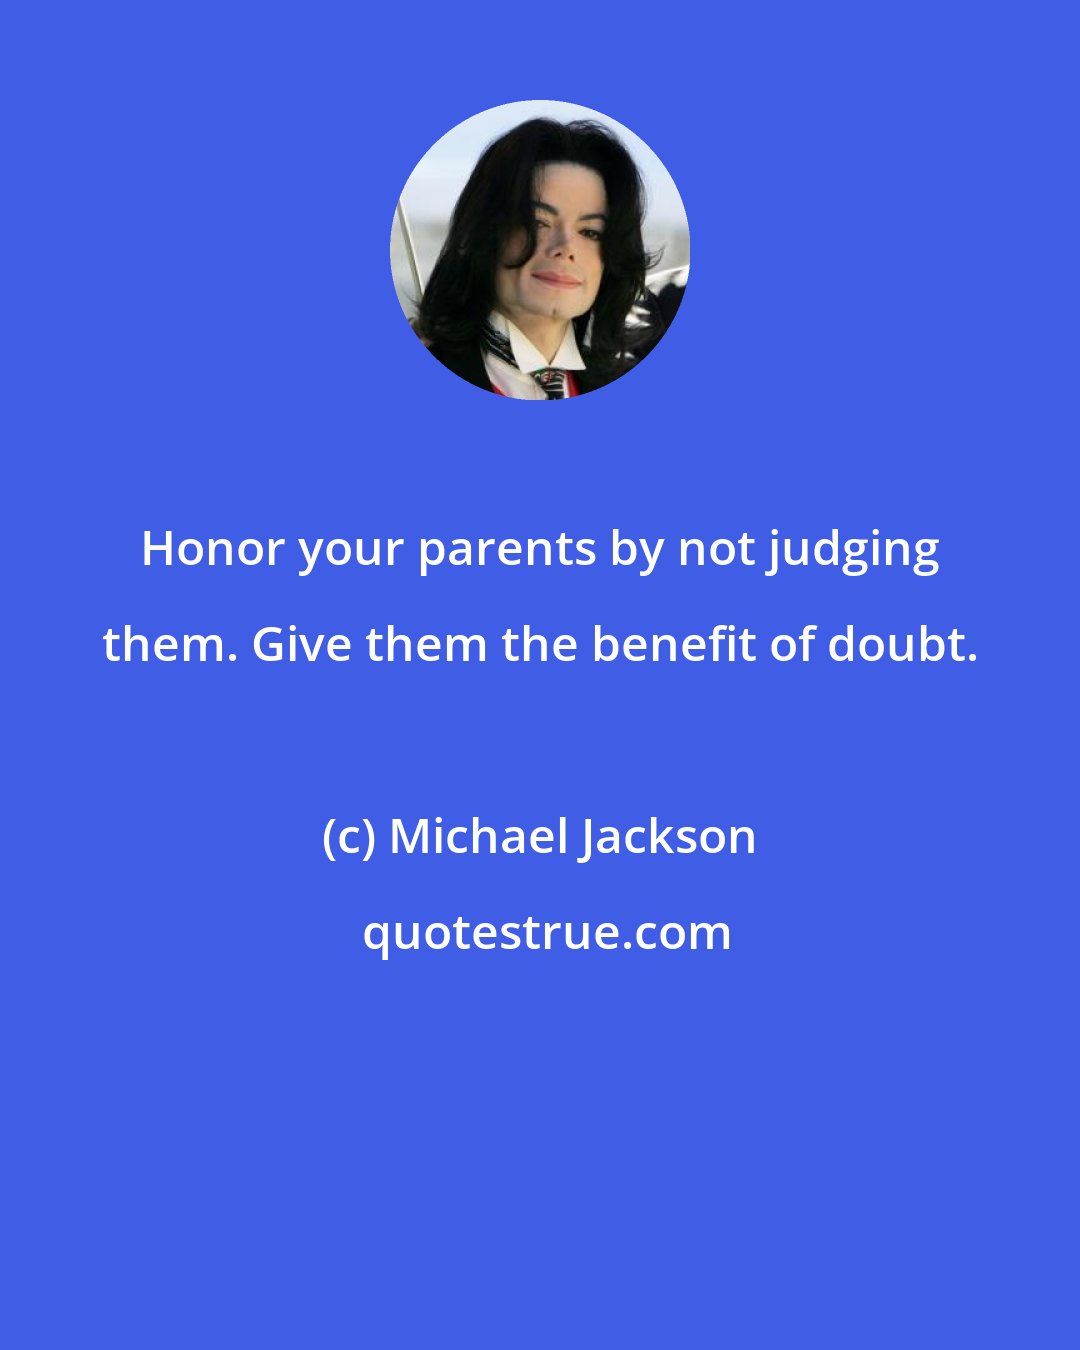 Michael Jackson: Honor your parents by not judging them. Give them the benefit of doubt.